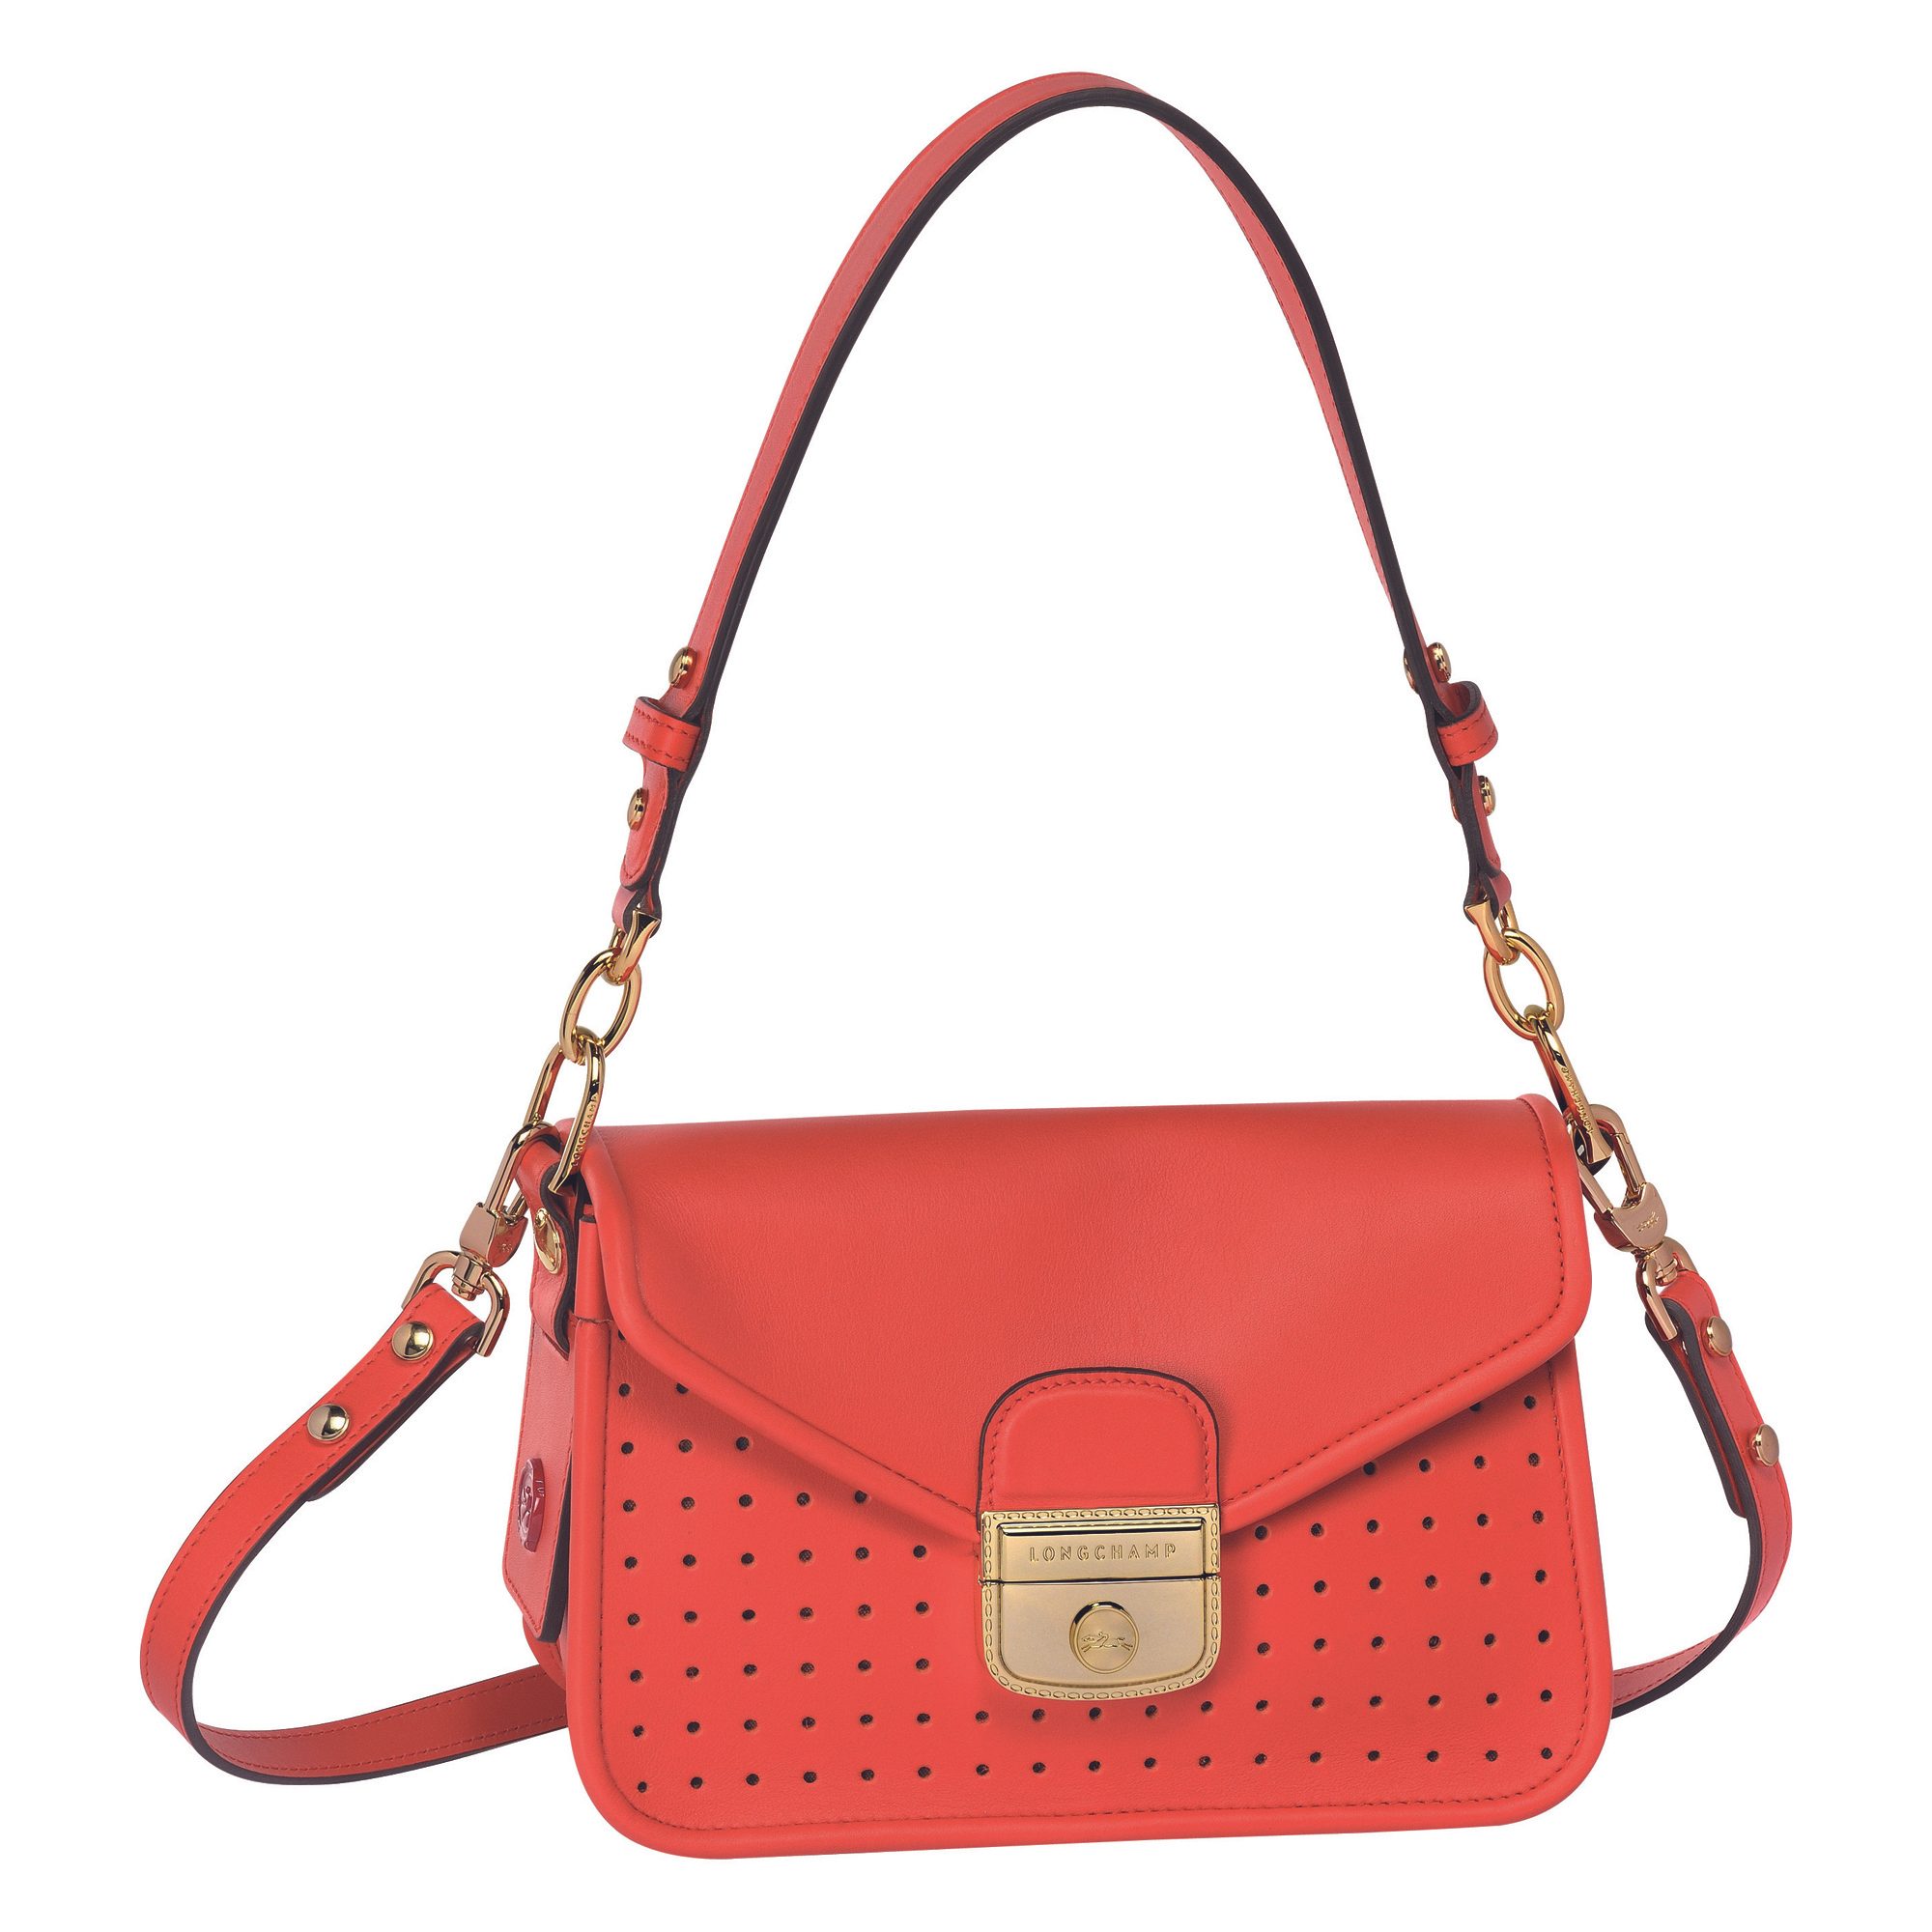 SHE'S GOTTA HAVE IT. The new Mademoiselle Longchamp crossbody will be your go-to purse 